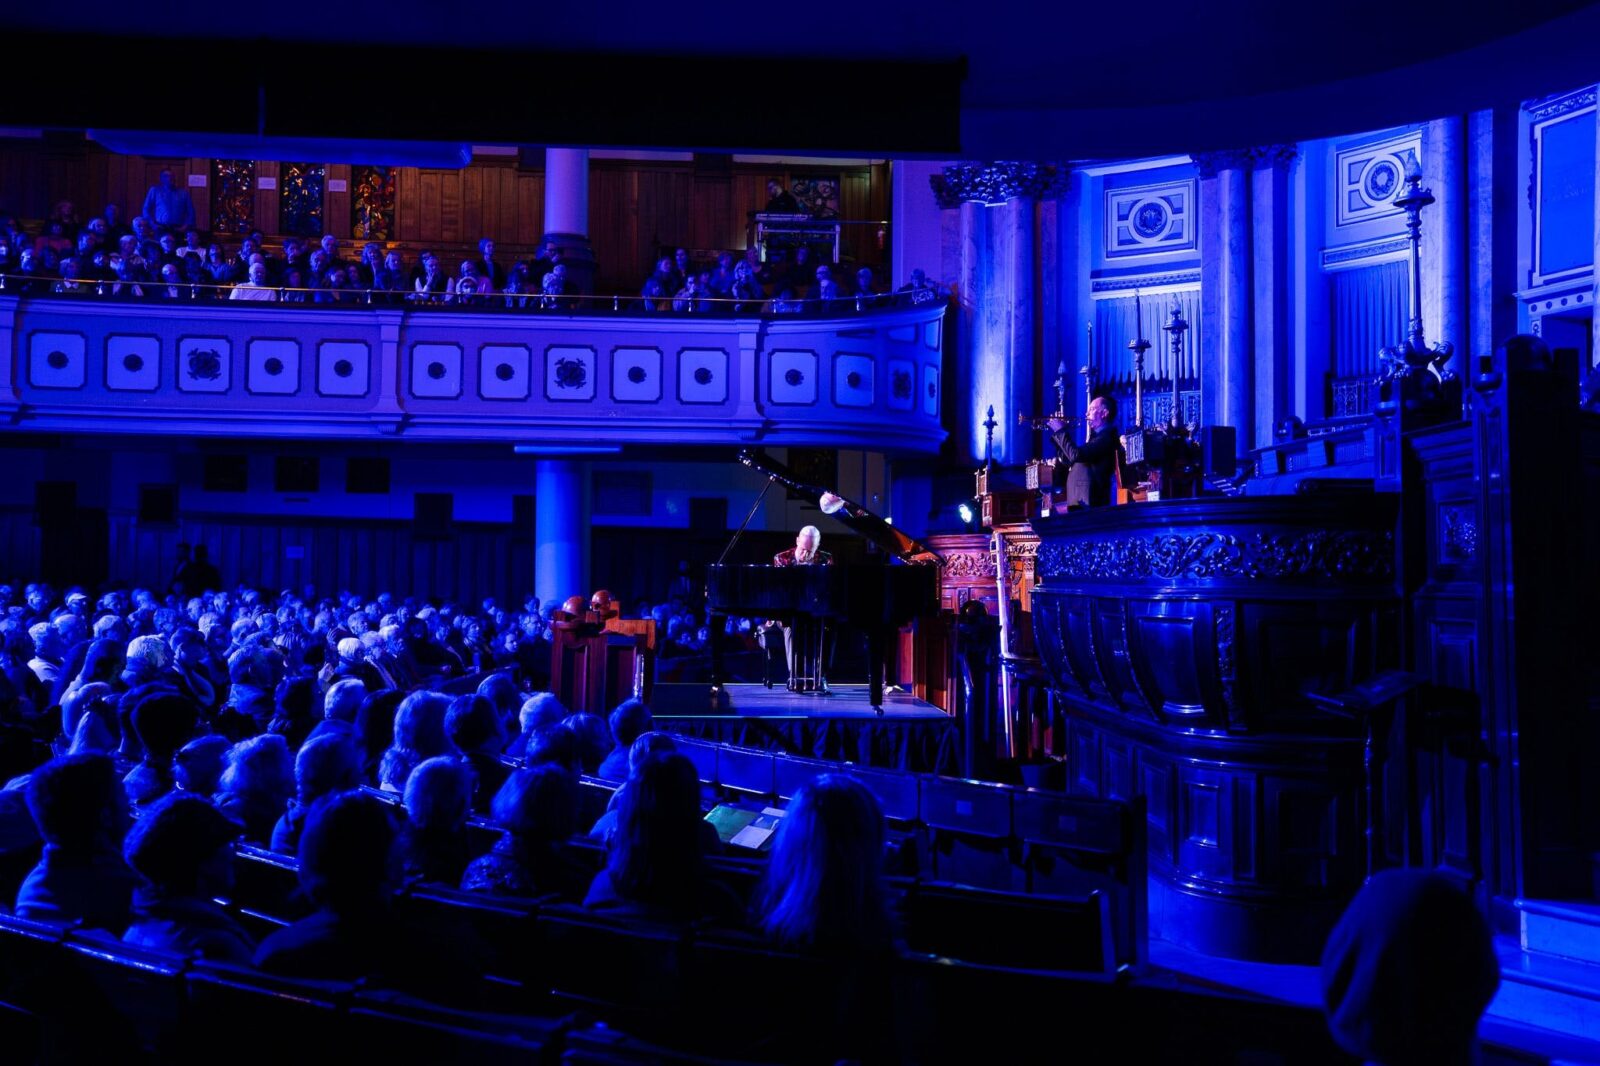 Man sitting at a grand piano on the synagogue stage, blue lighting and a captive audience